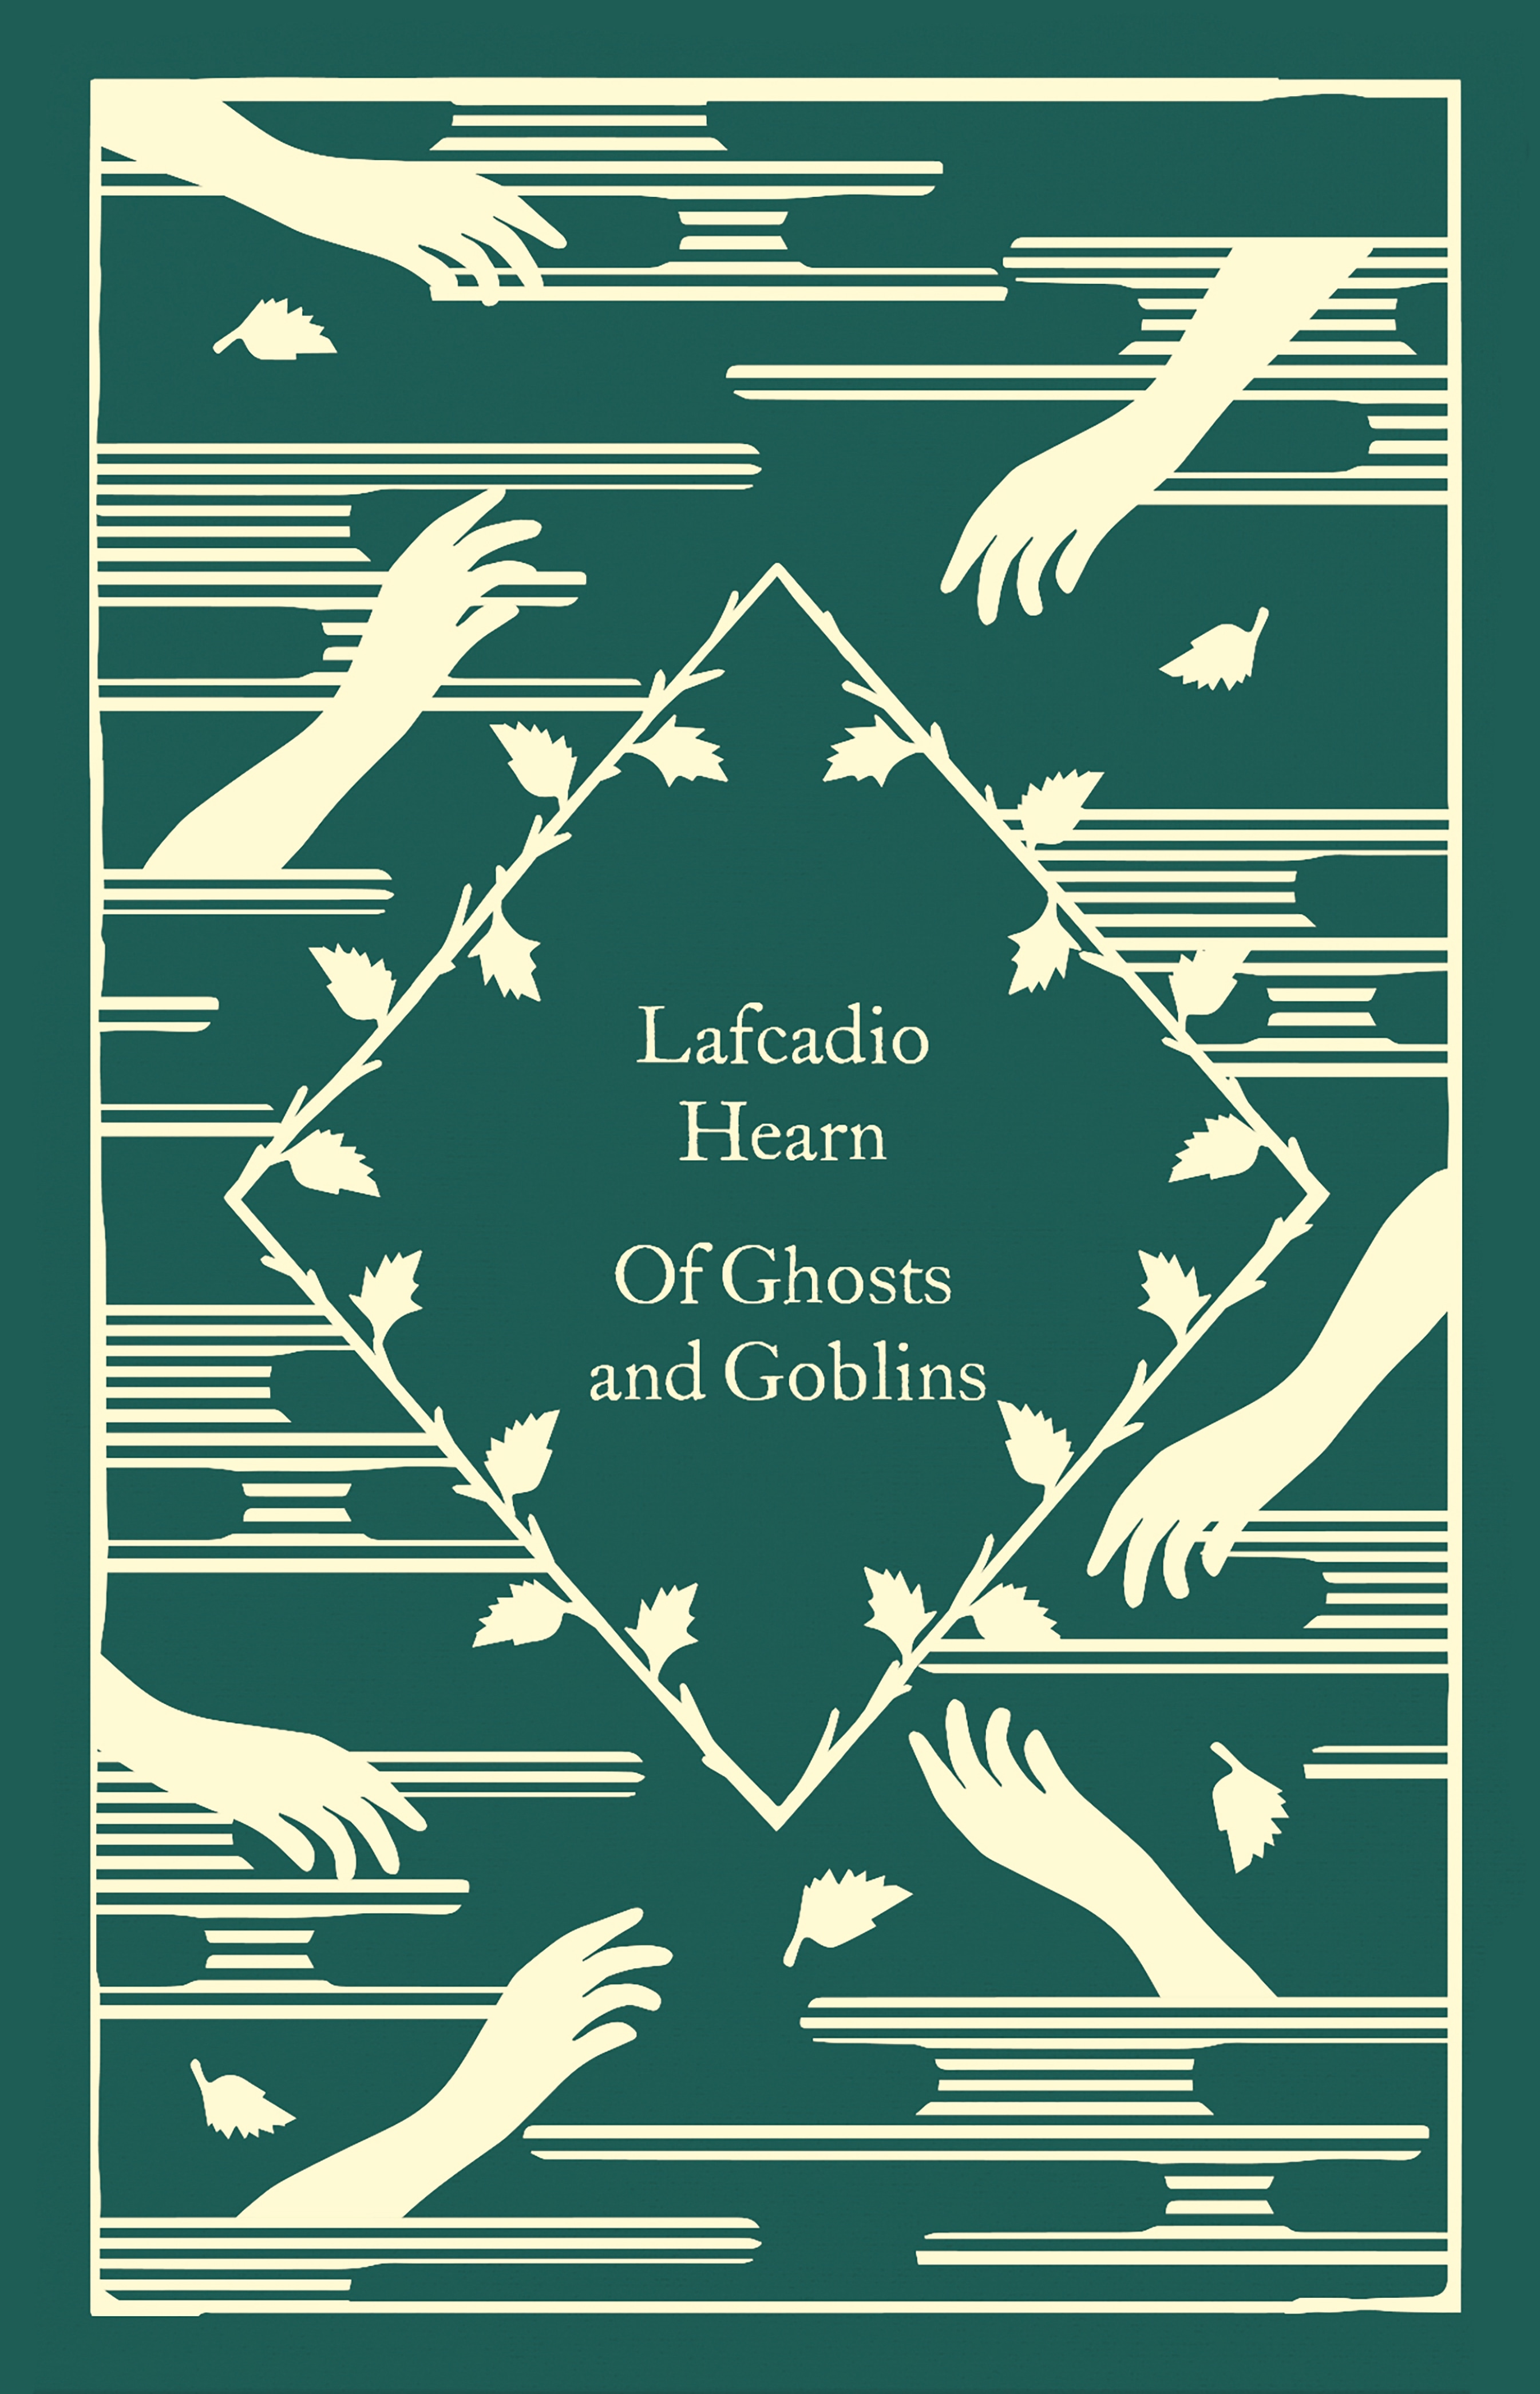 Book “Of Ghosts And Goblins” by Lafcadio Hearn — August 25, 2022